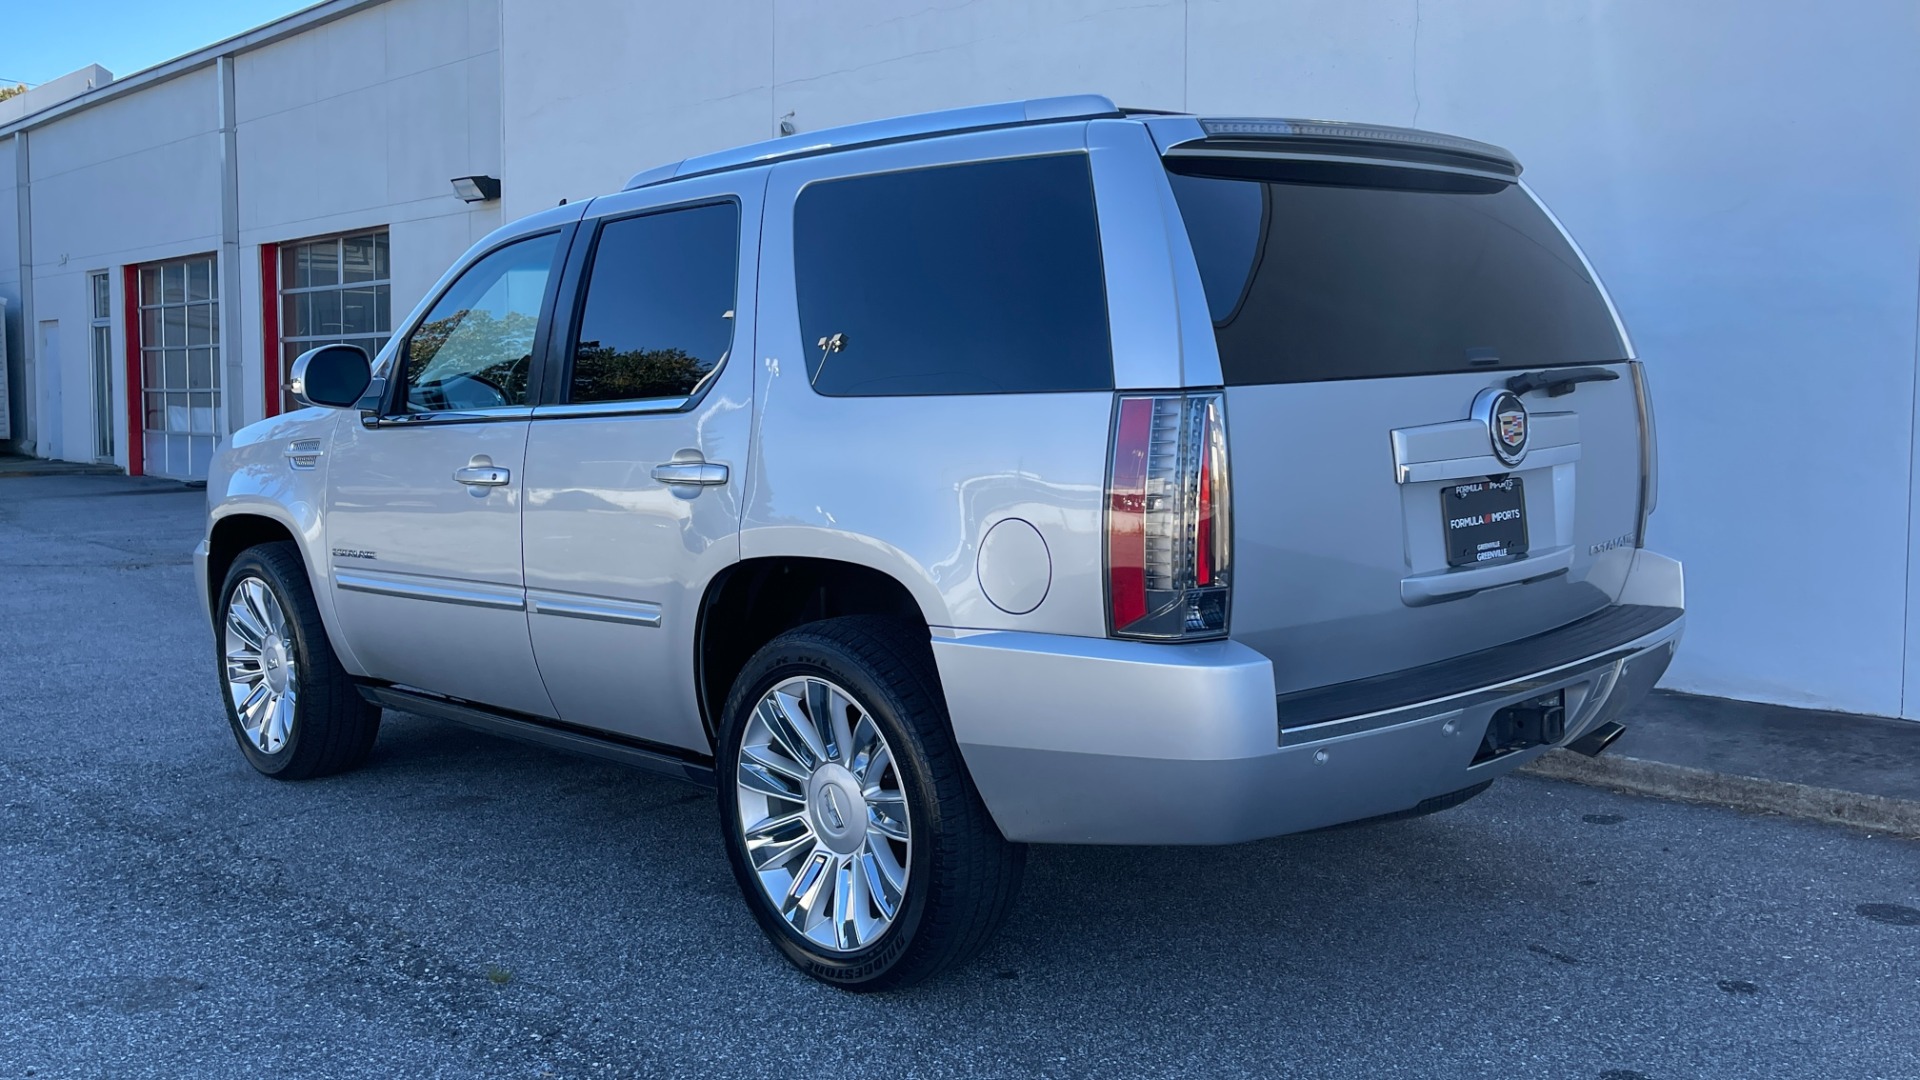 Used 2013 Cadillac Escalade PREMIUM / NAVIGATION / LEATHER / 3 ROW / AWD / LED LIGHTS for sale $25,599 at Formula Imports in Charlotte NC 28227 7